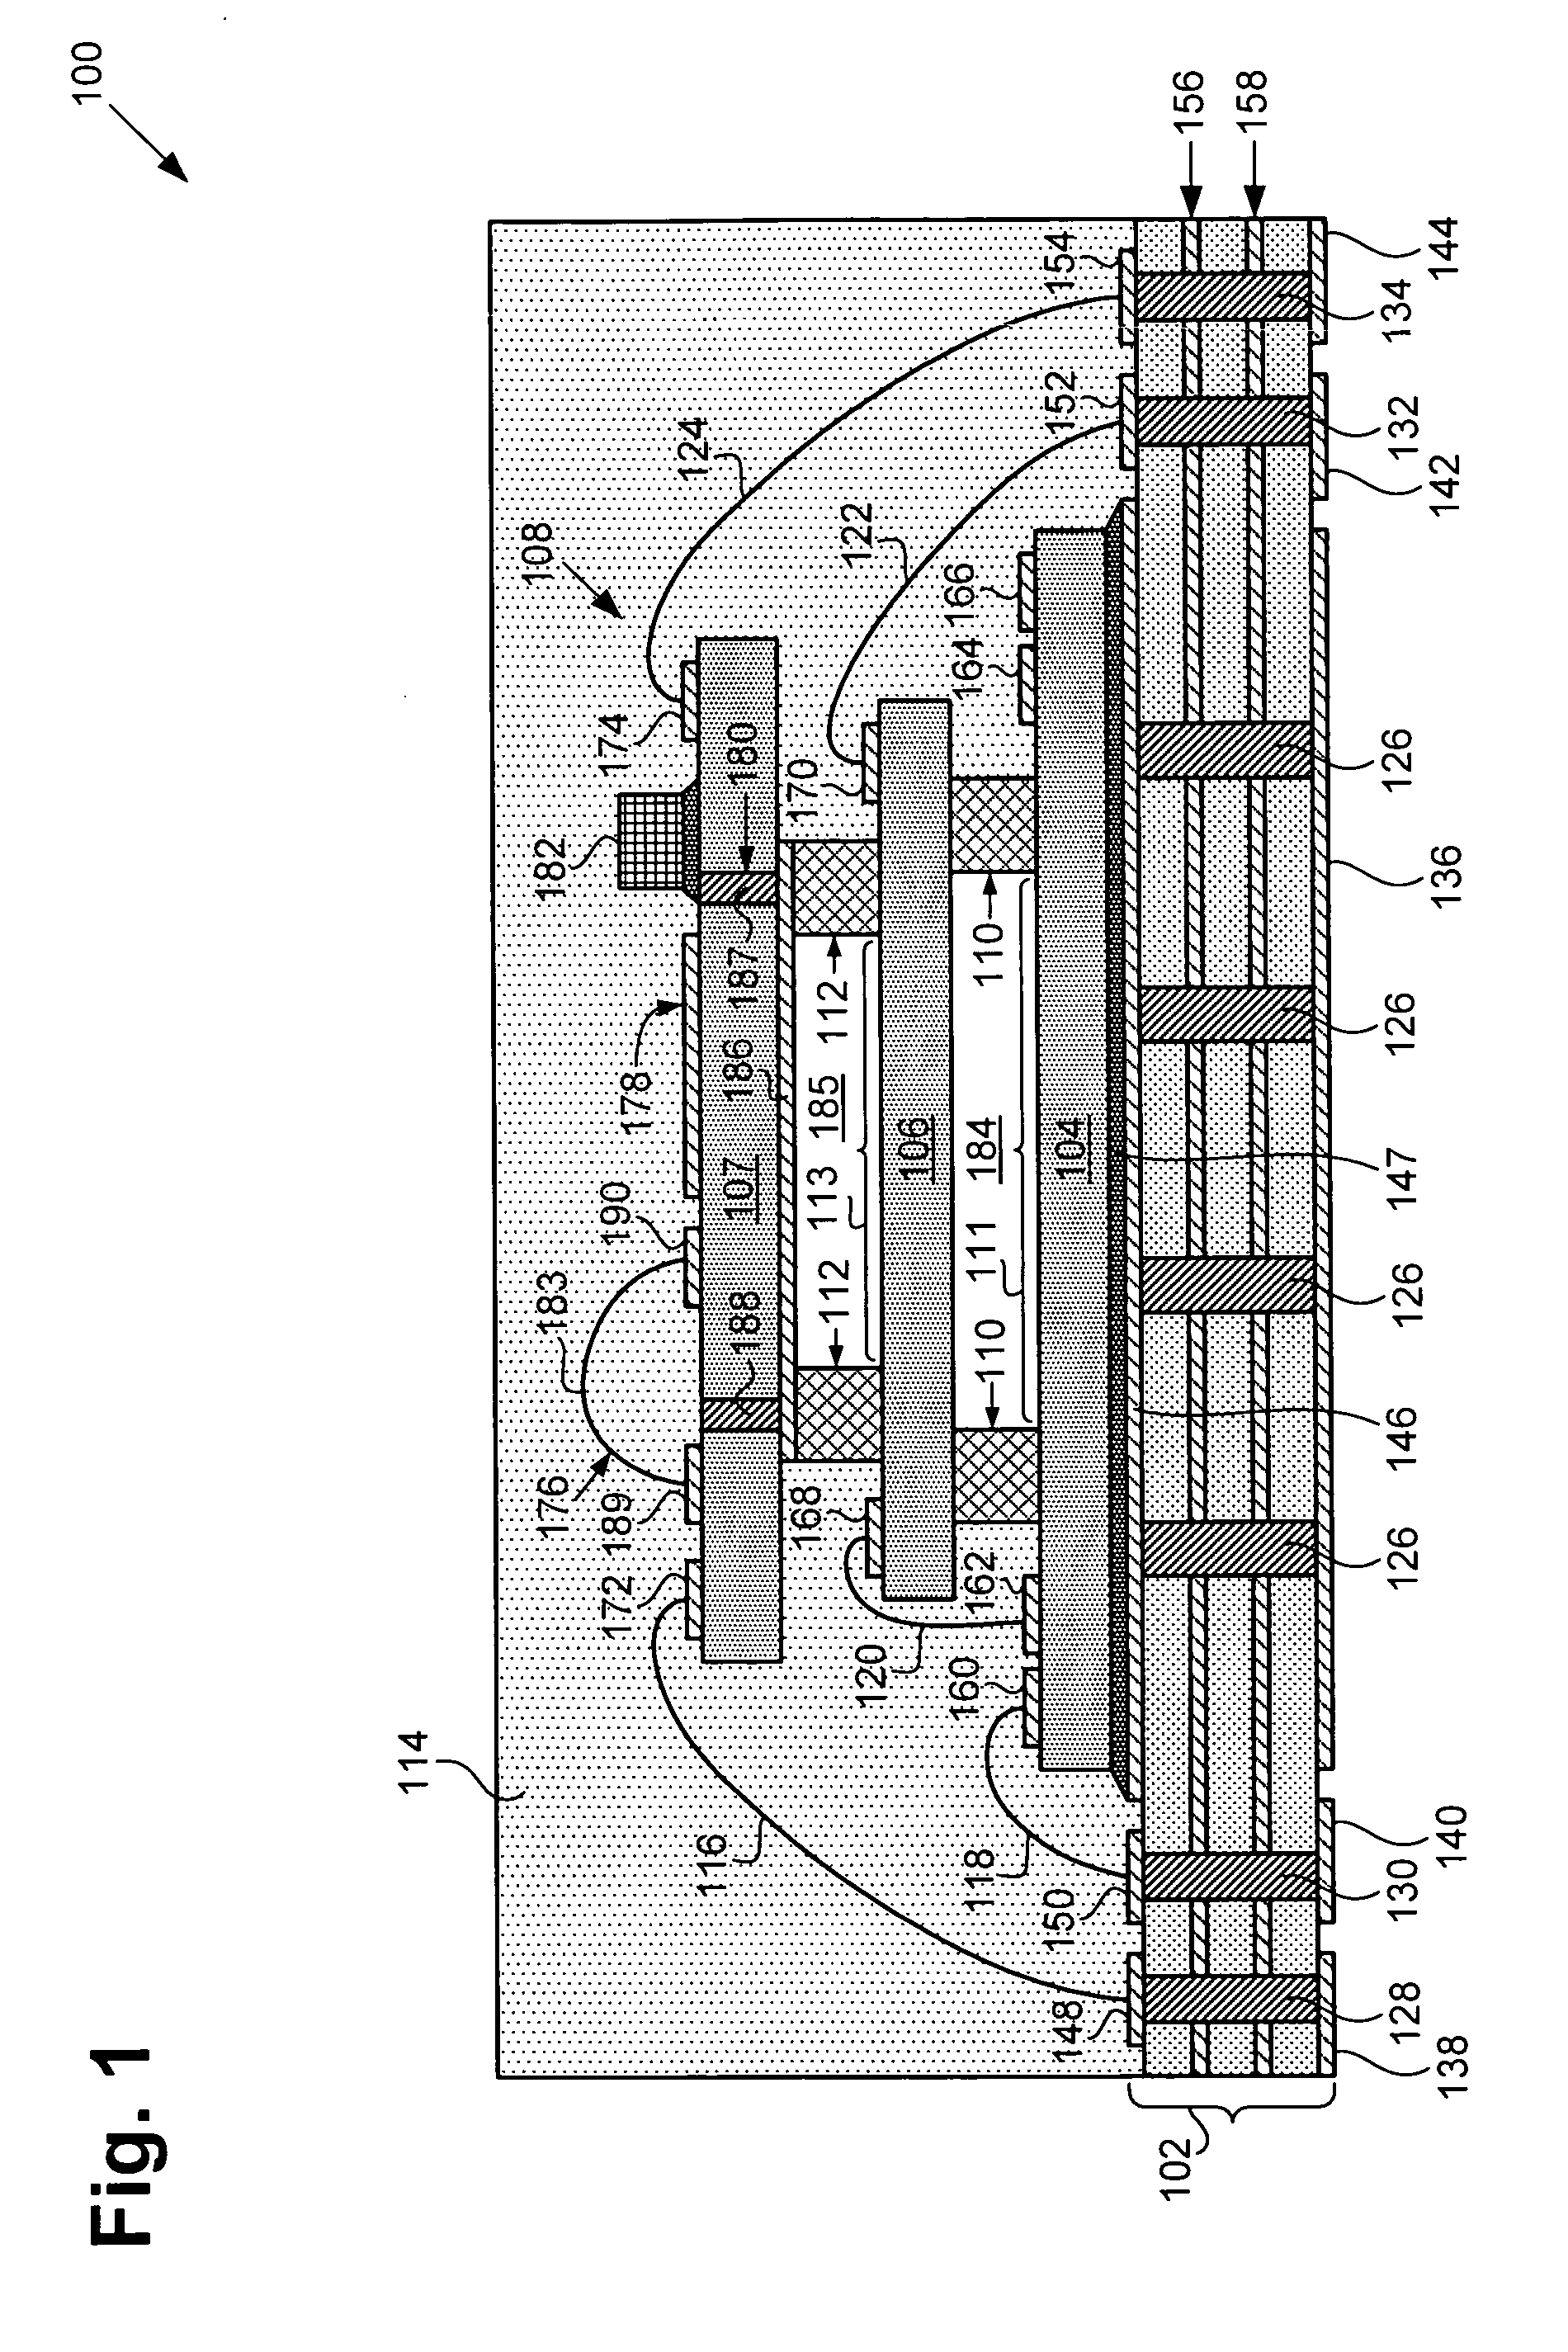 Integrated passive cap in a system-in-package